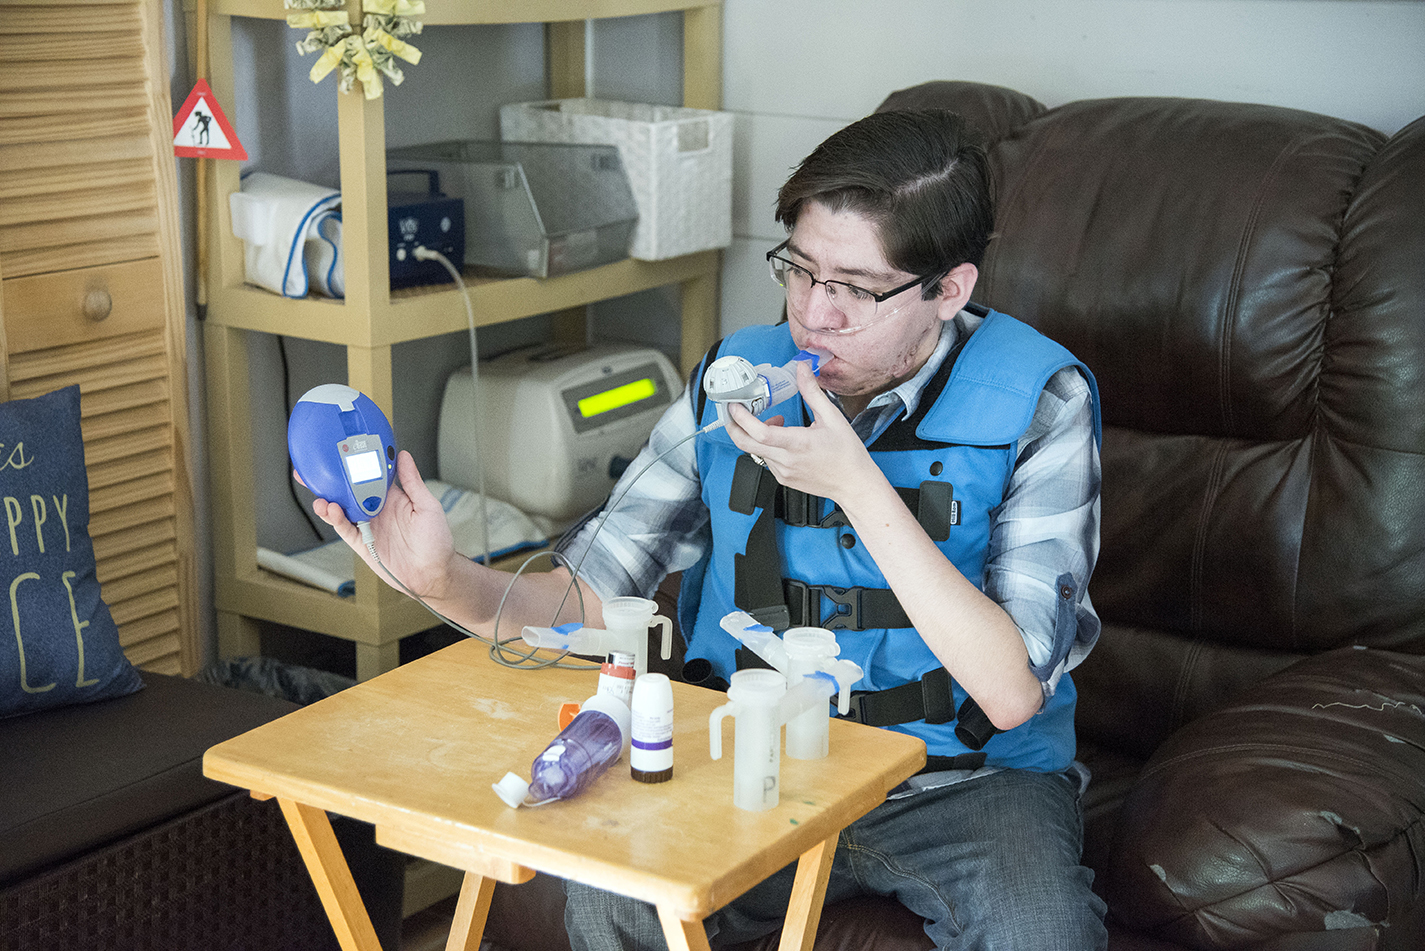 Former NE student Victor Garcia demonstrates how to use one of the machines that administers a medication to help treat his cystic fibrosis.